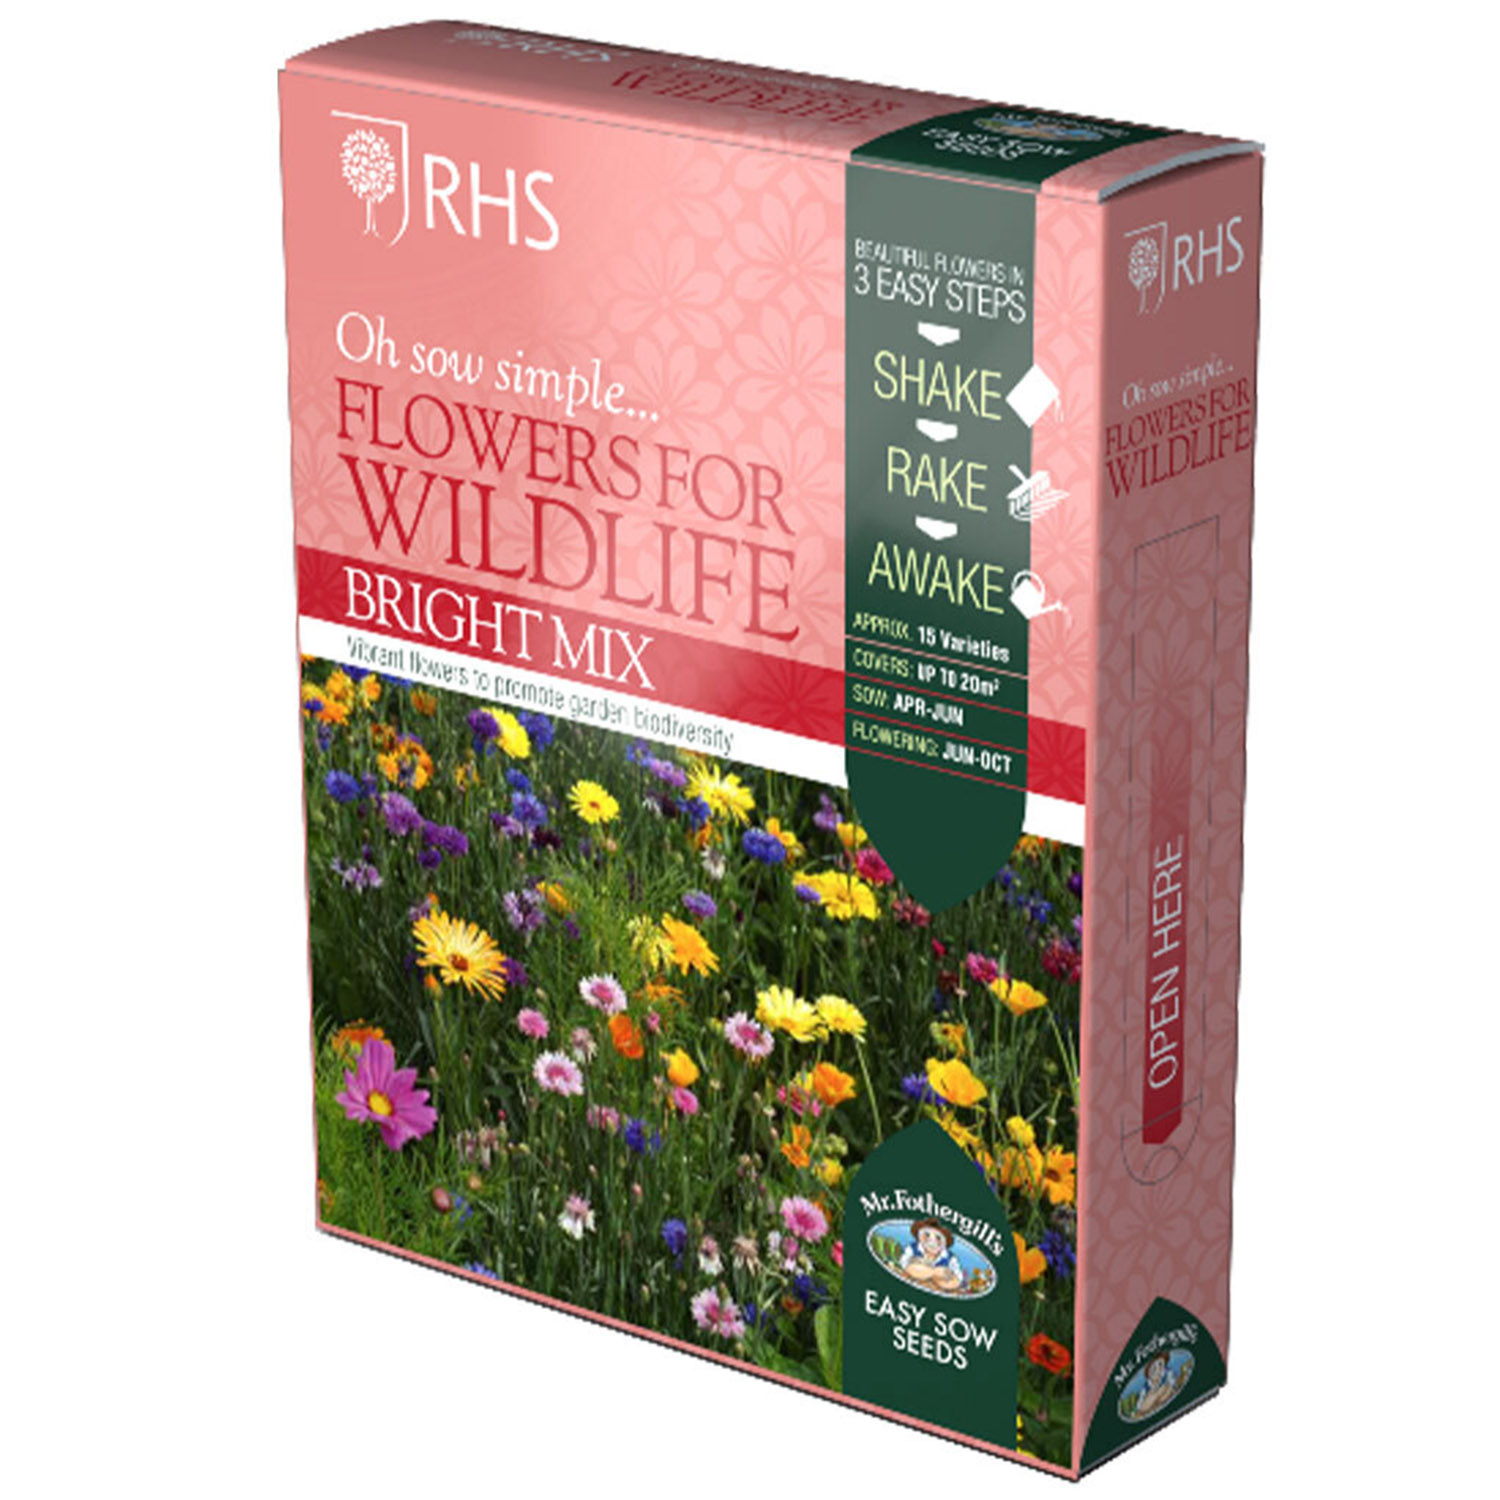 Mr Fothergill's Seeds Wildflower Bright Colour Flower Seeds Image